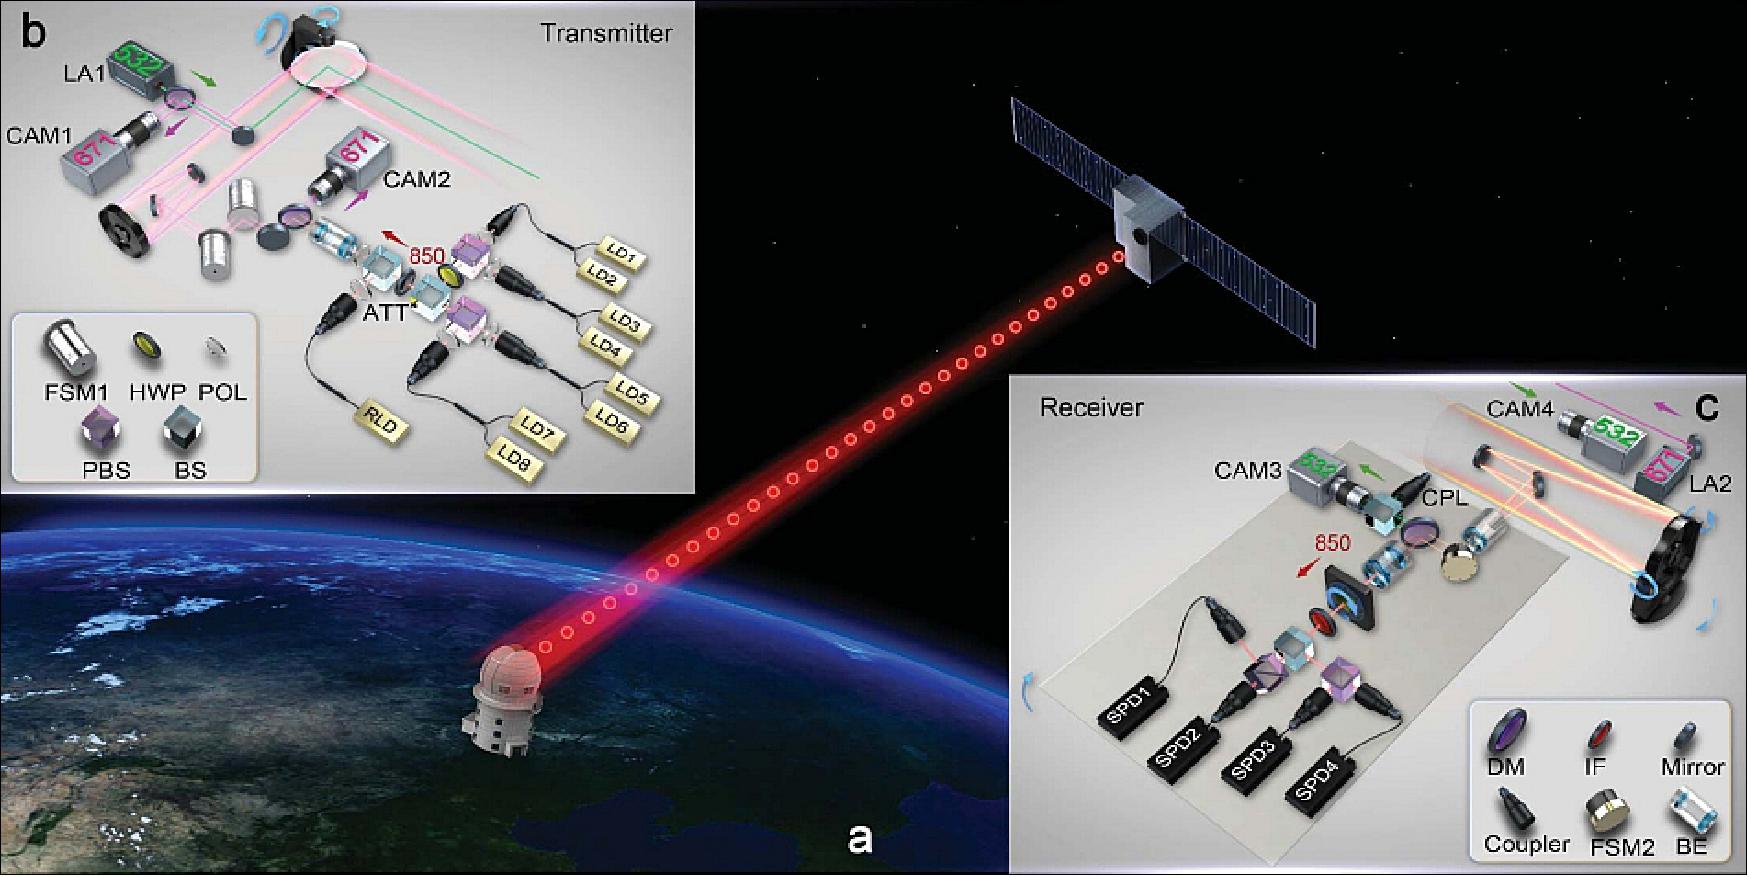 Figure 9: Illustration of the experimental set-up from "Satellite-to-ground quantum key distribution"(image credit: Chinese QUESS Research Team, Ref. 14)